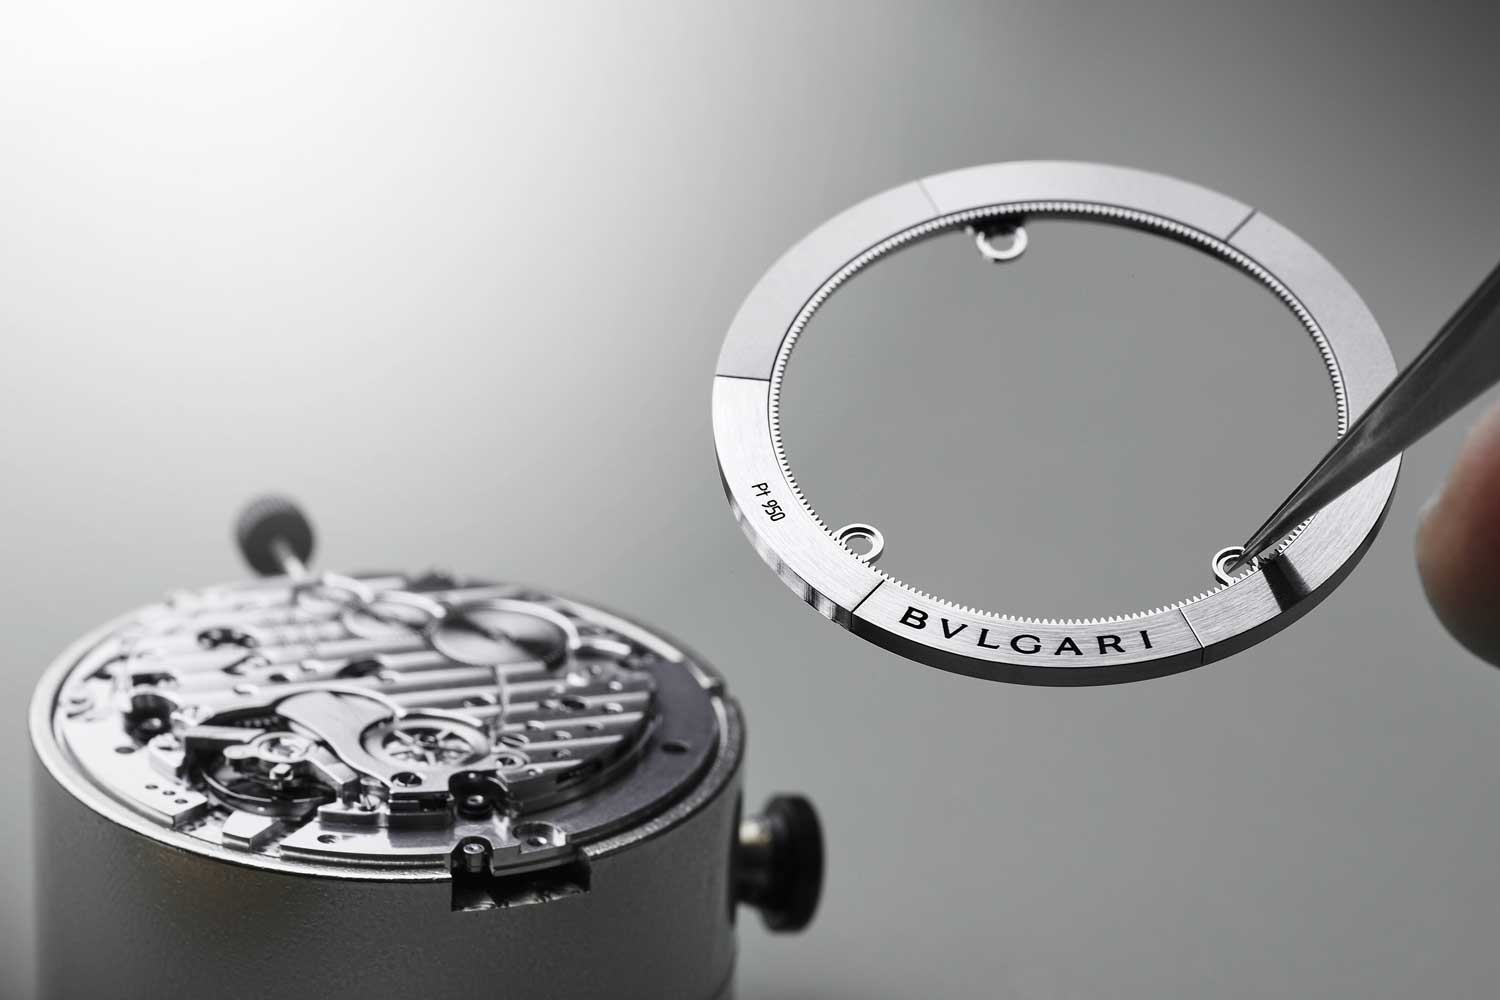 The platinum and aluminum periphery rotor of the BVL 318 movement powering the Octo Finissimo Chronograph GMT Automatic